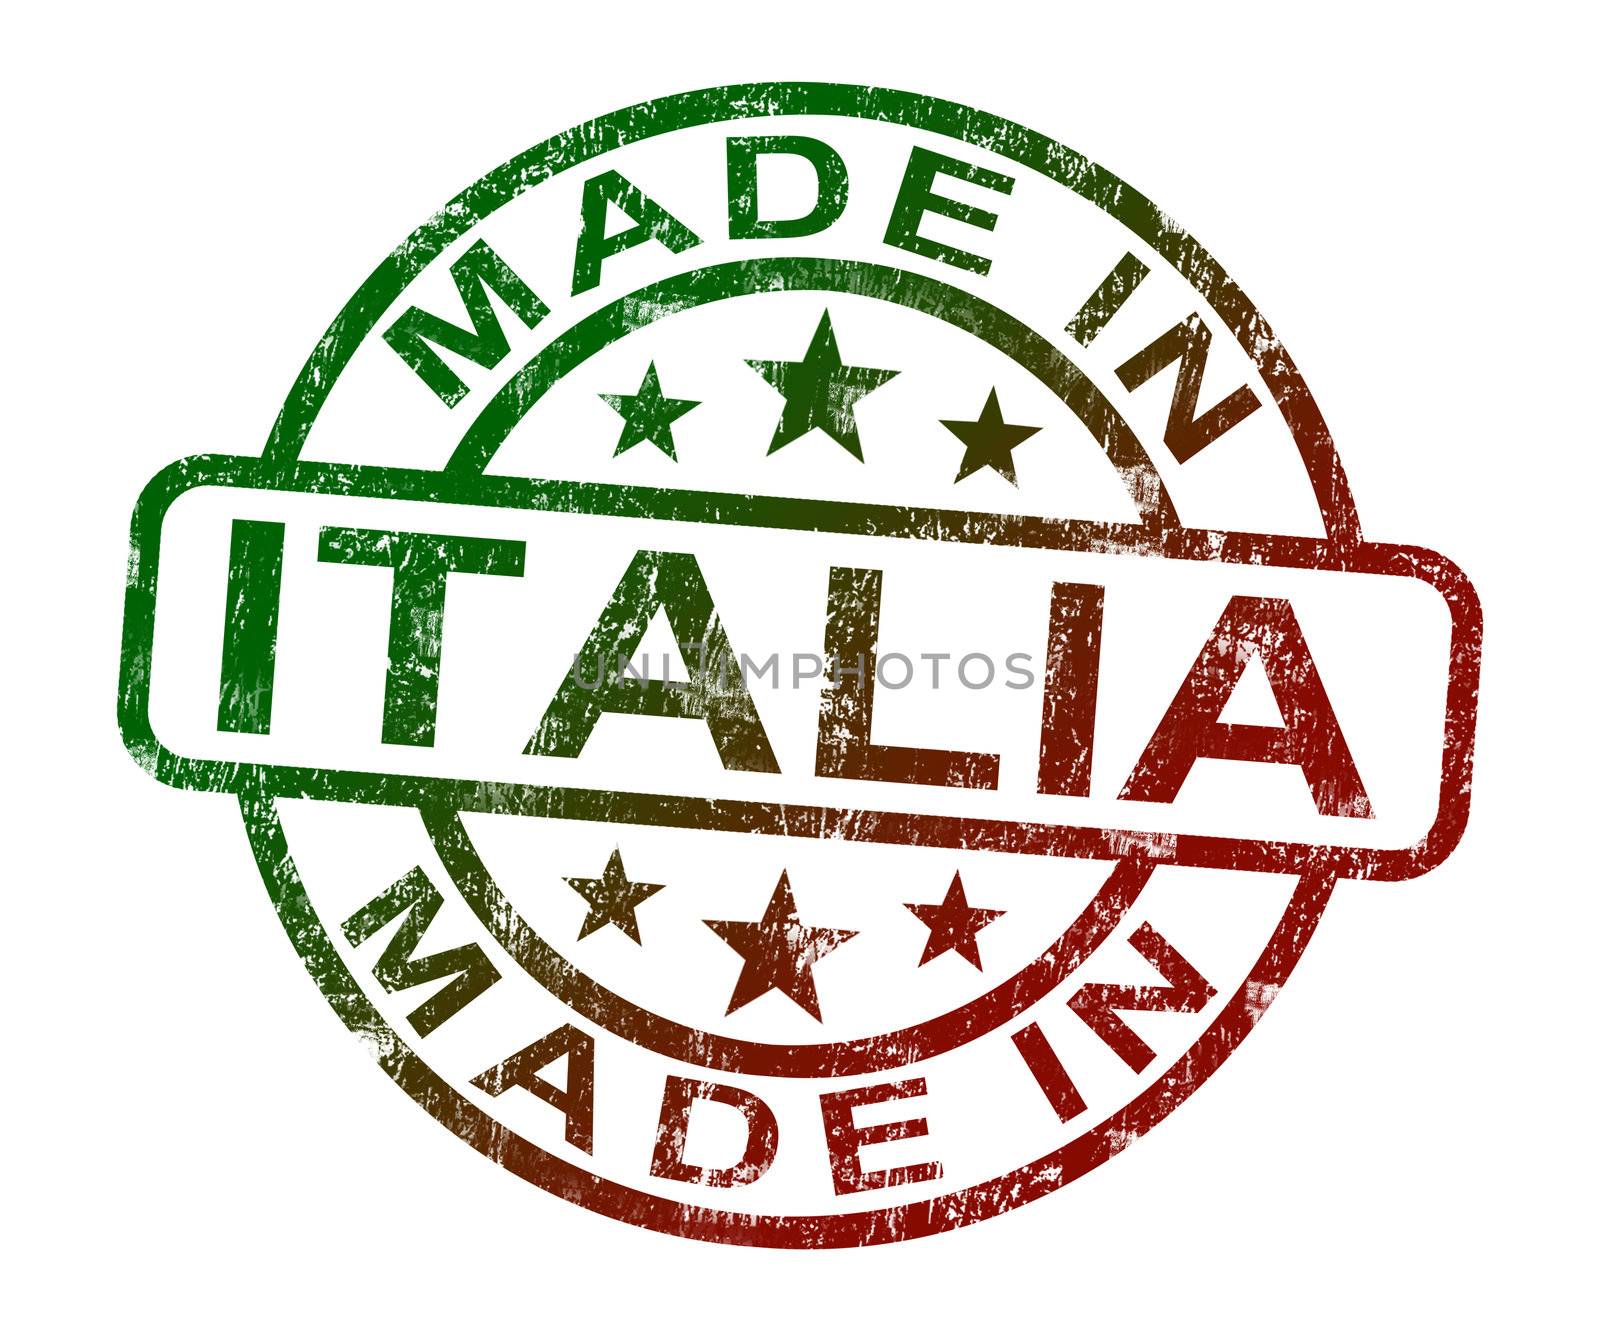 Made In Italia Stamp Shows Product Or Produce From Italy by stuartmiles